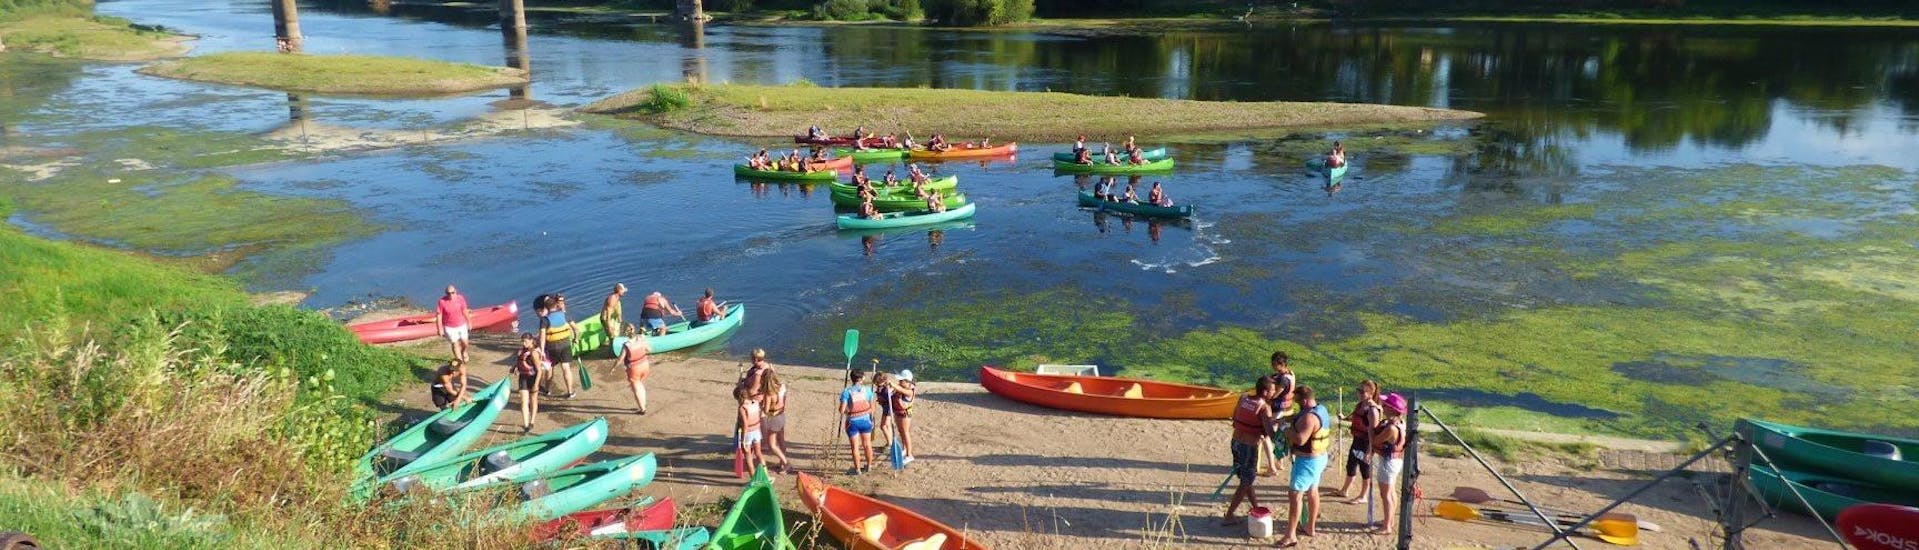 Holidaymakers are getting into the water for their 11km Canoe Rental on the Dordogne to Port-Sainte-Foy with Canoe Kayak Port-Sainte-Foy.